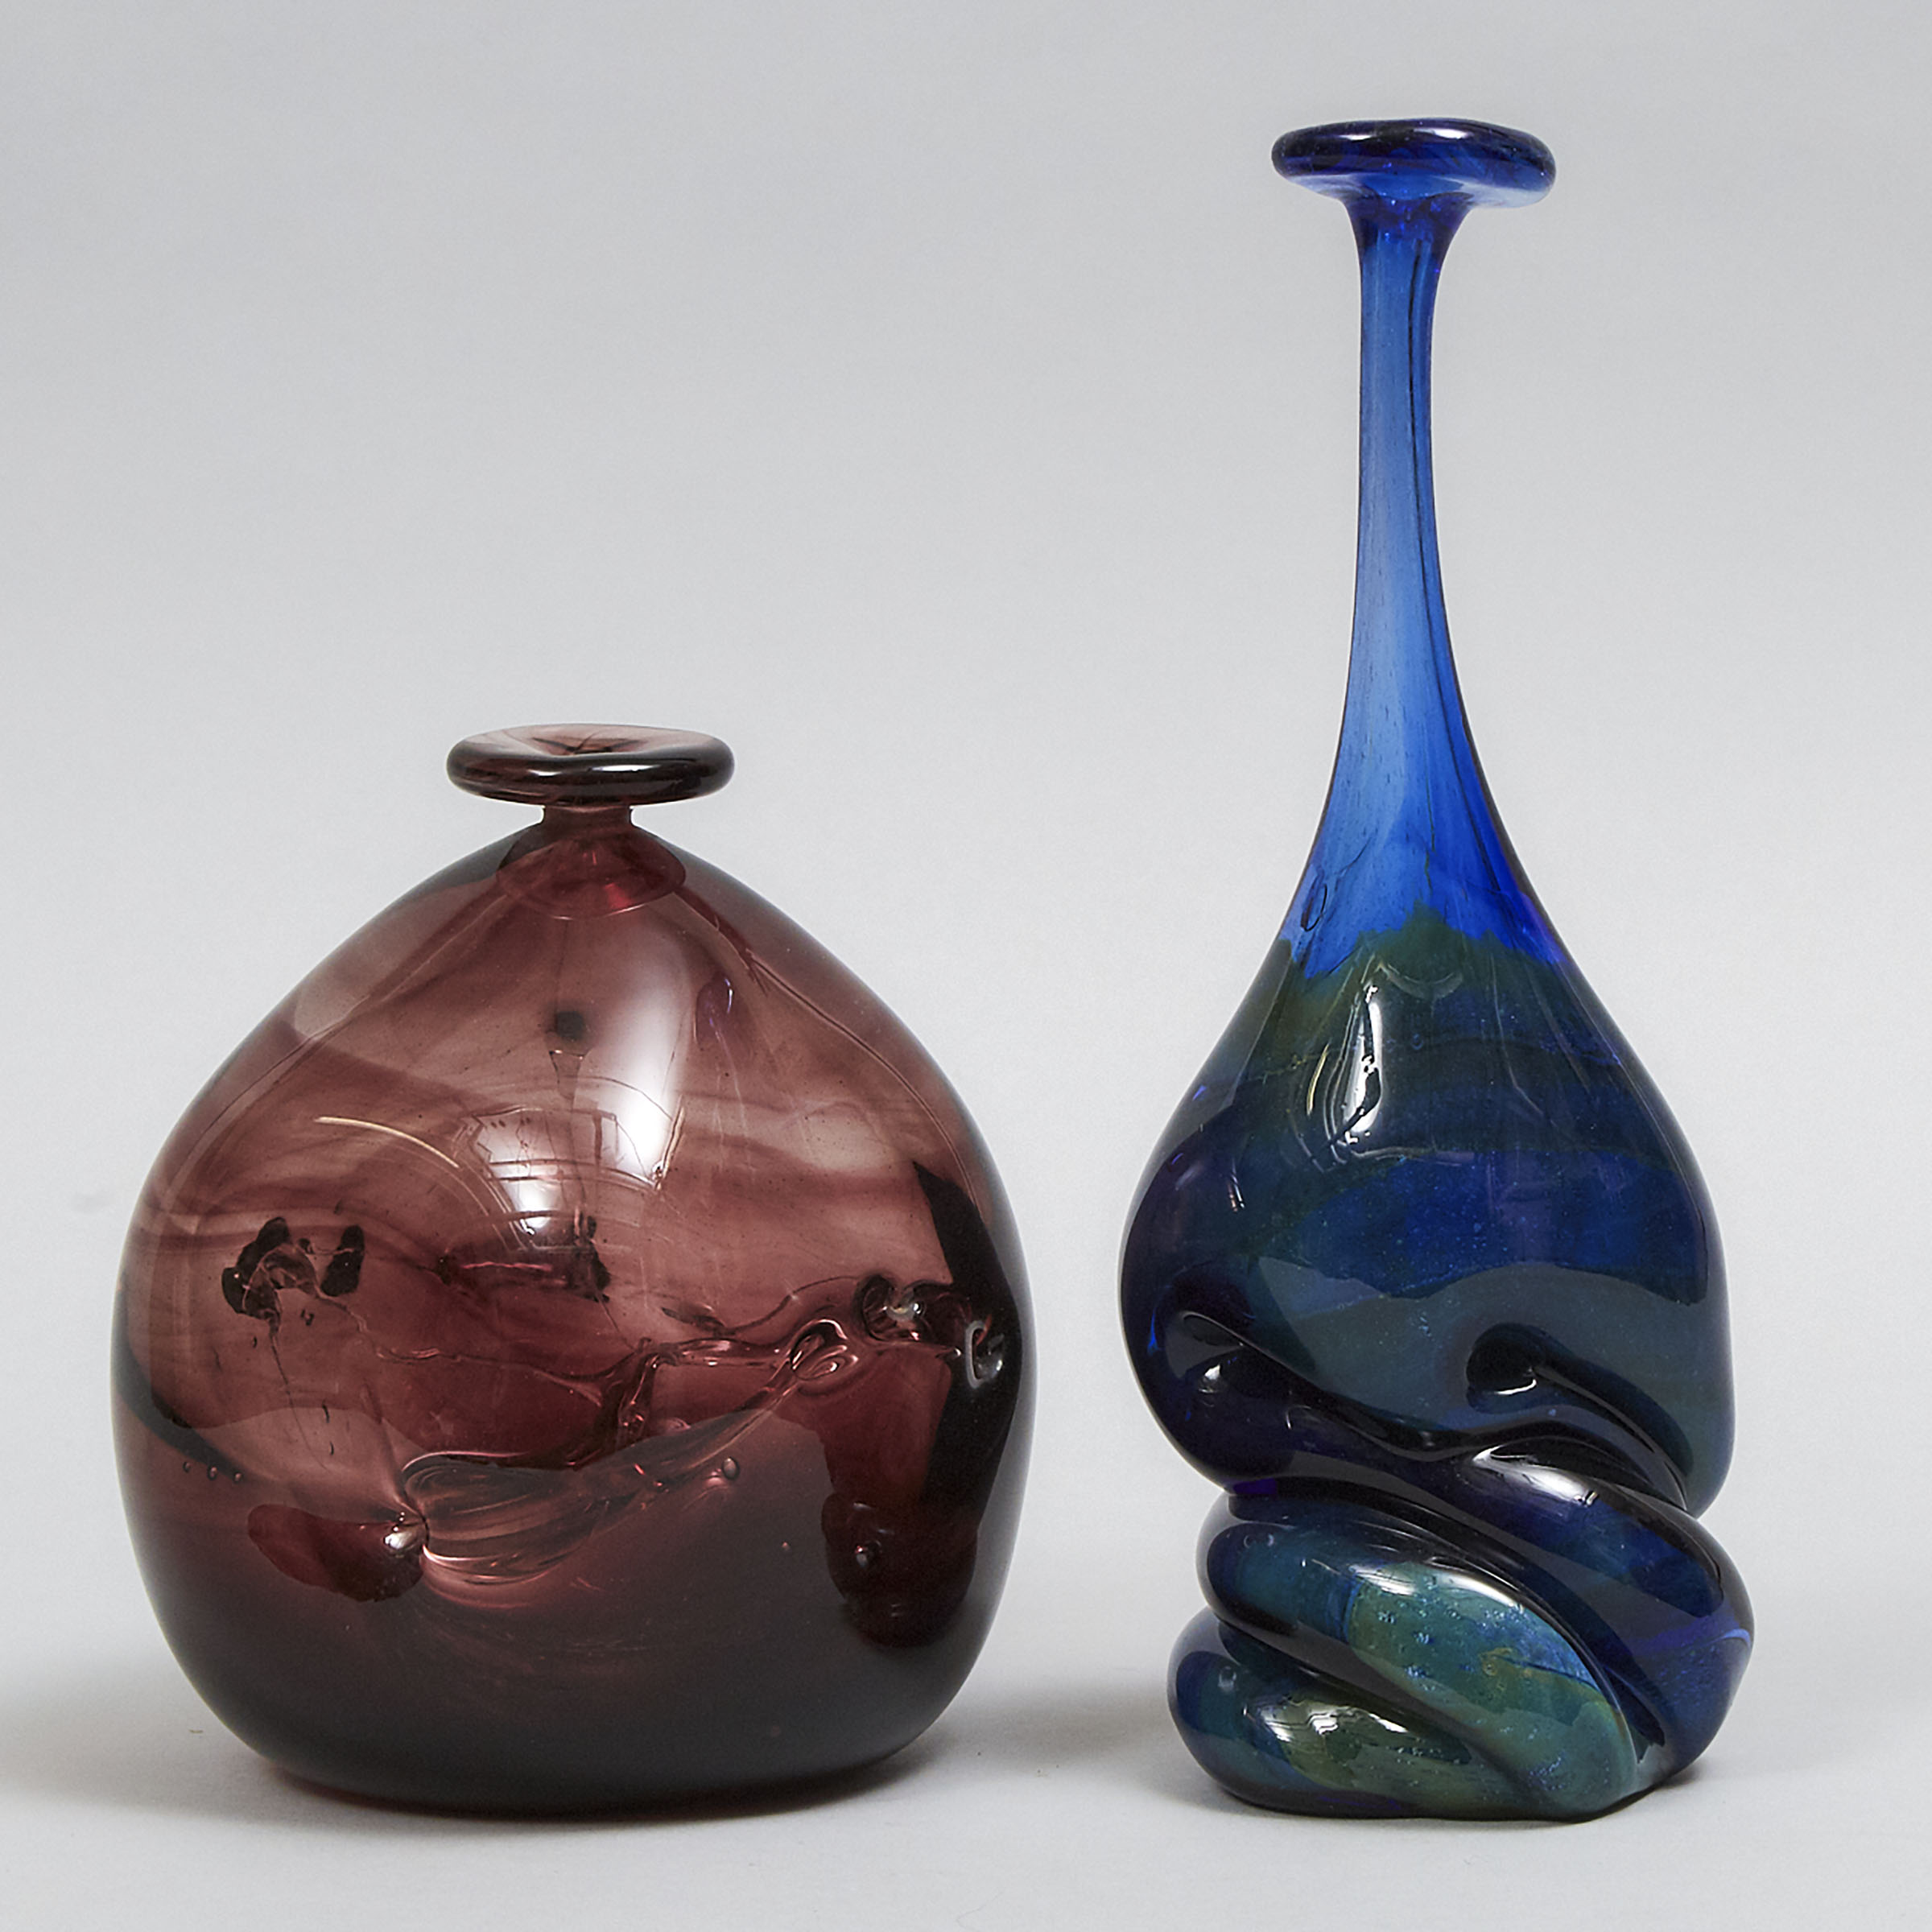 Michael Robinson (Canadian, 1948-2010), Two Coloured Glass Vases, 1970s